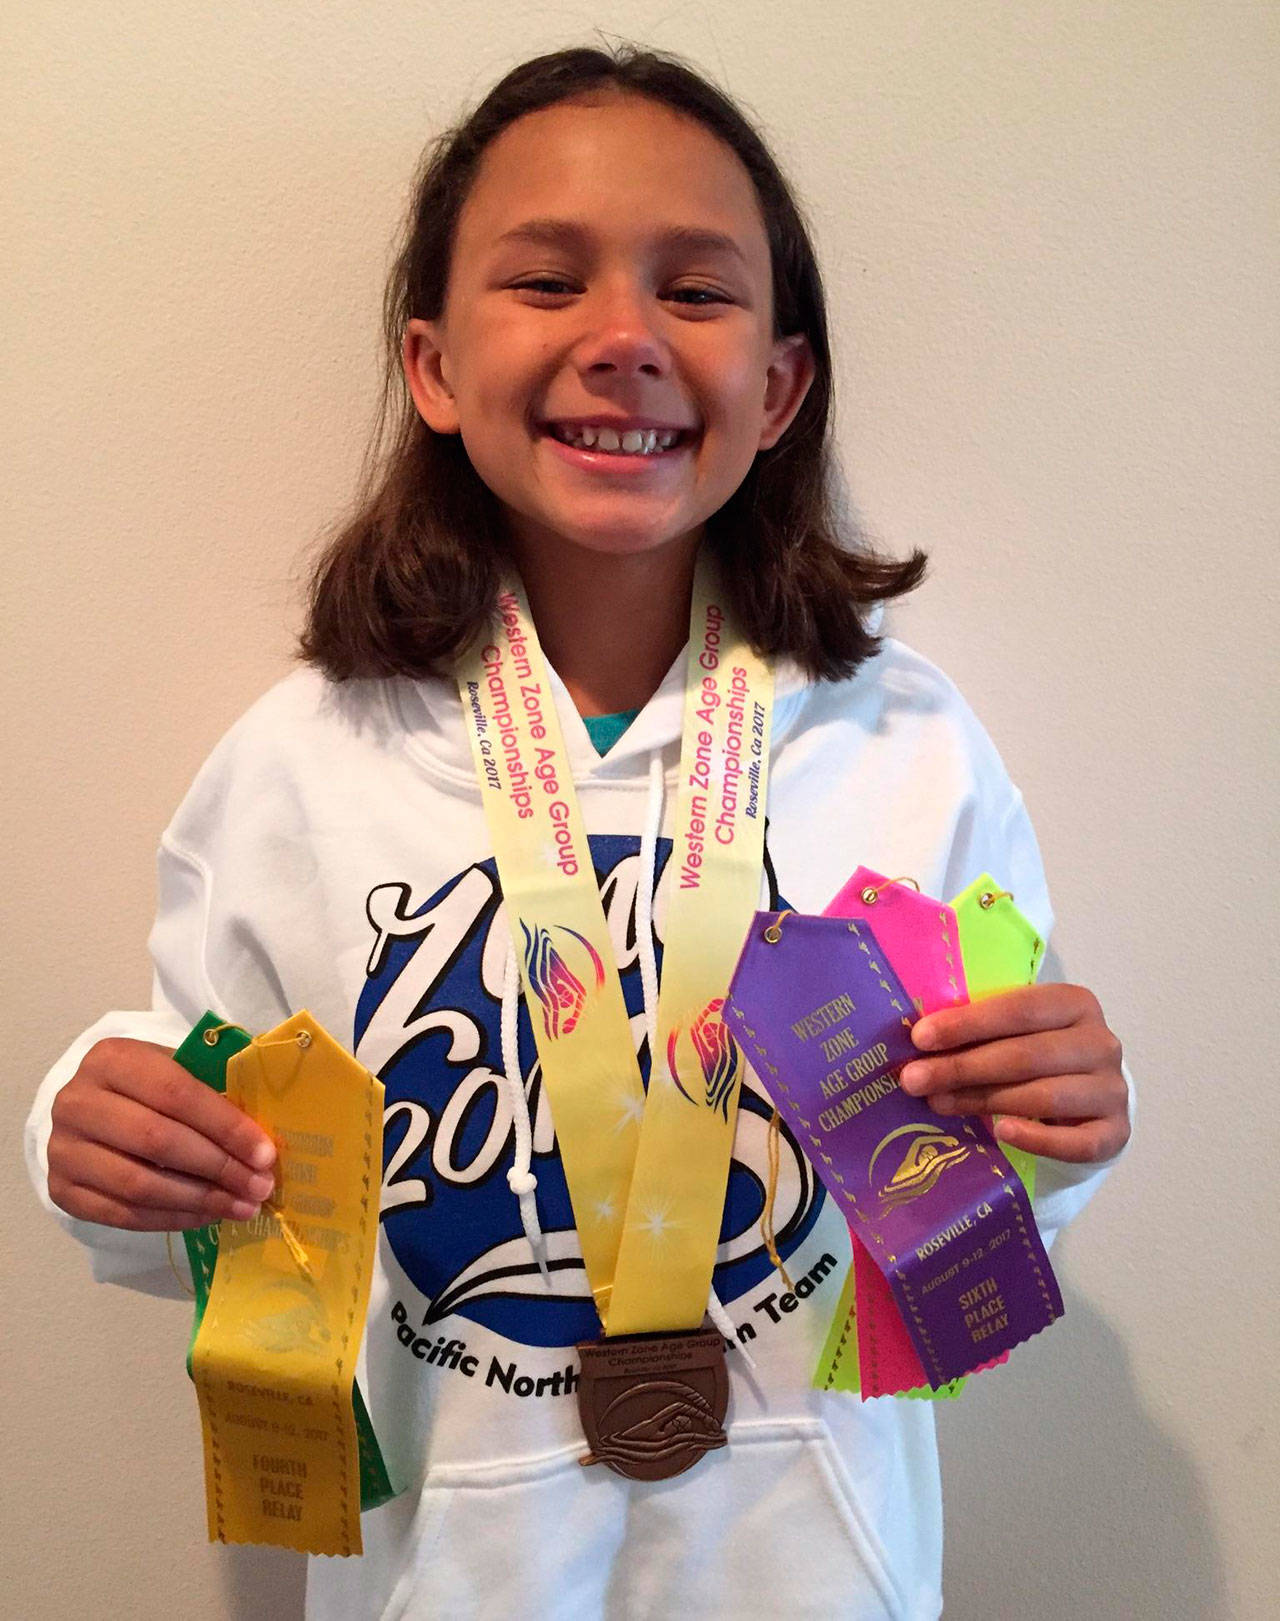 Haley Borja could use a few more hands to hold the awards she collected at the zone championships. (Submitted photo)